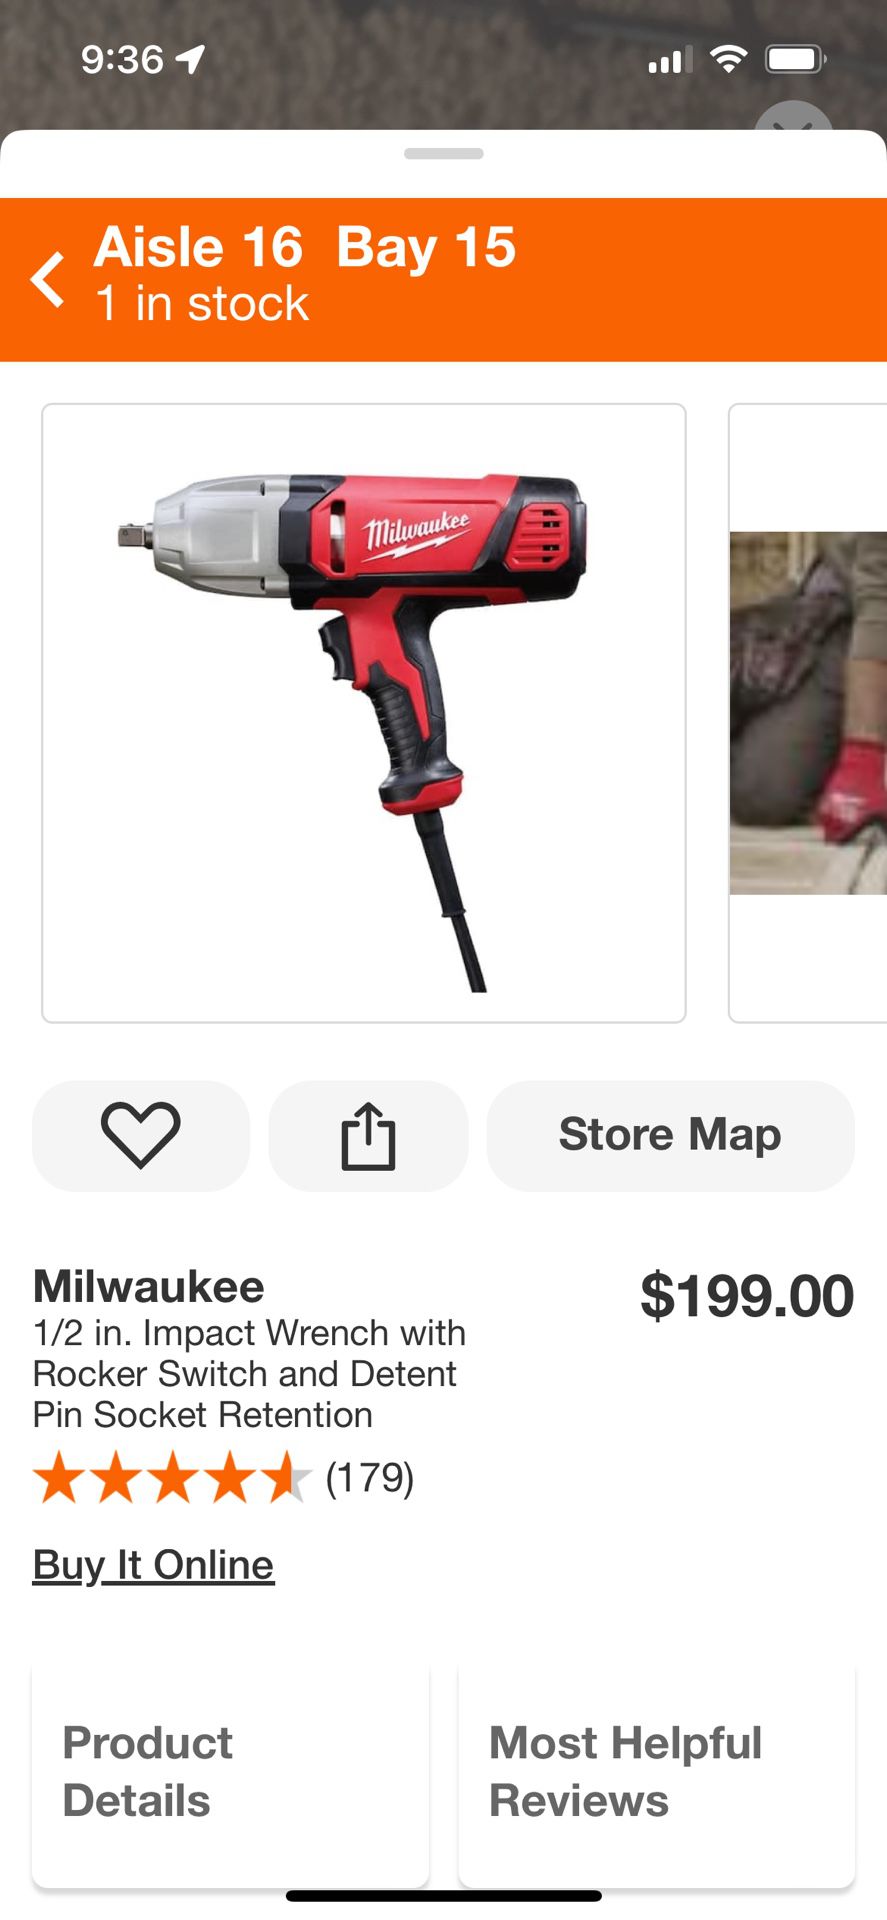 1/2” Impact Wrench, Not Negotiable, Fixed Price 